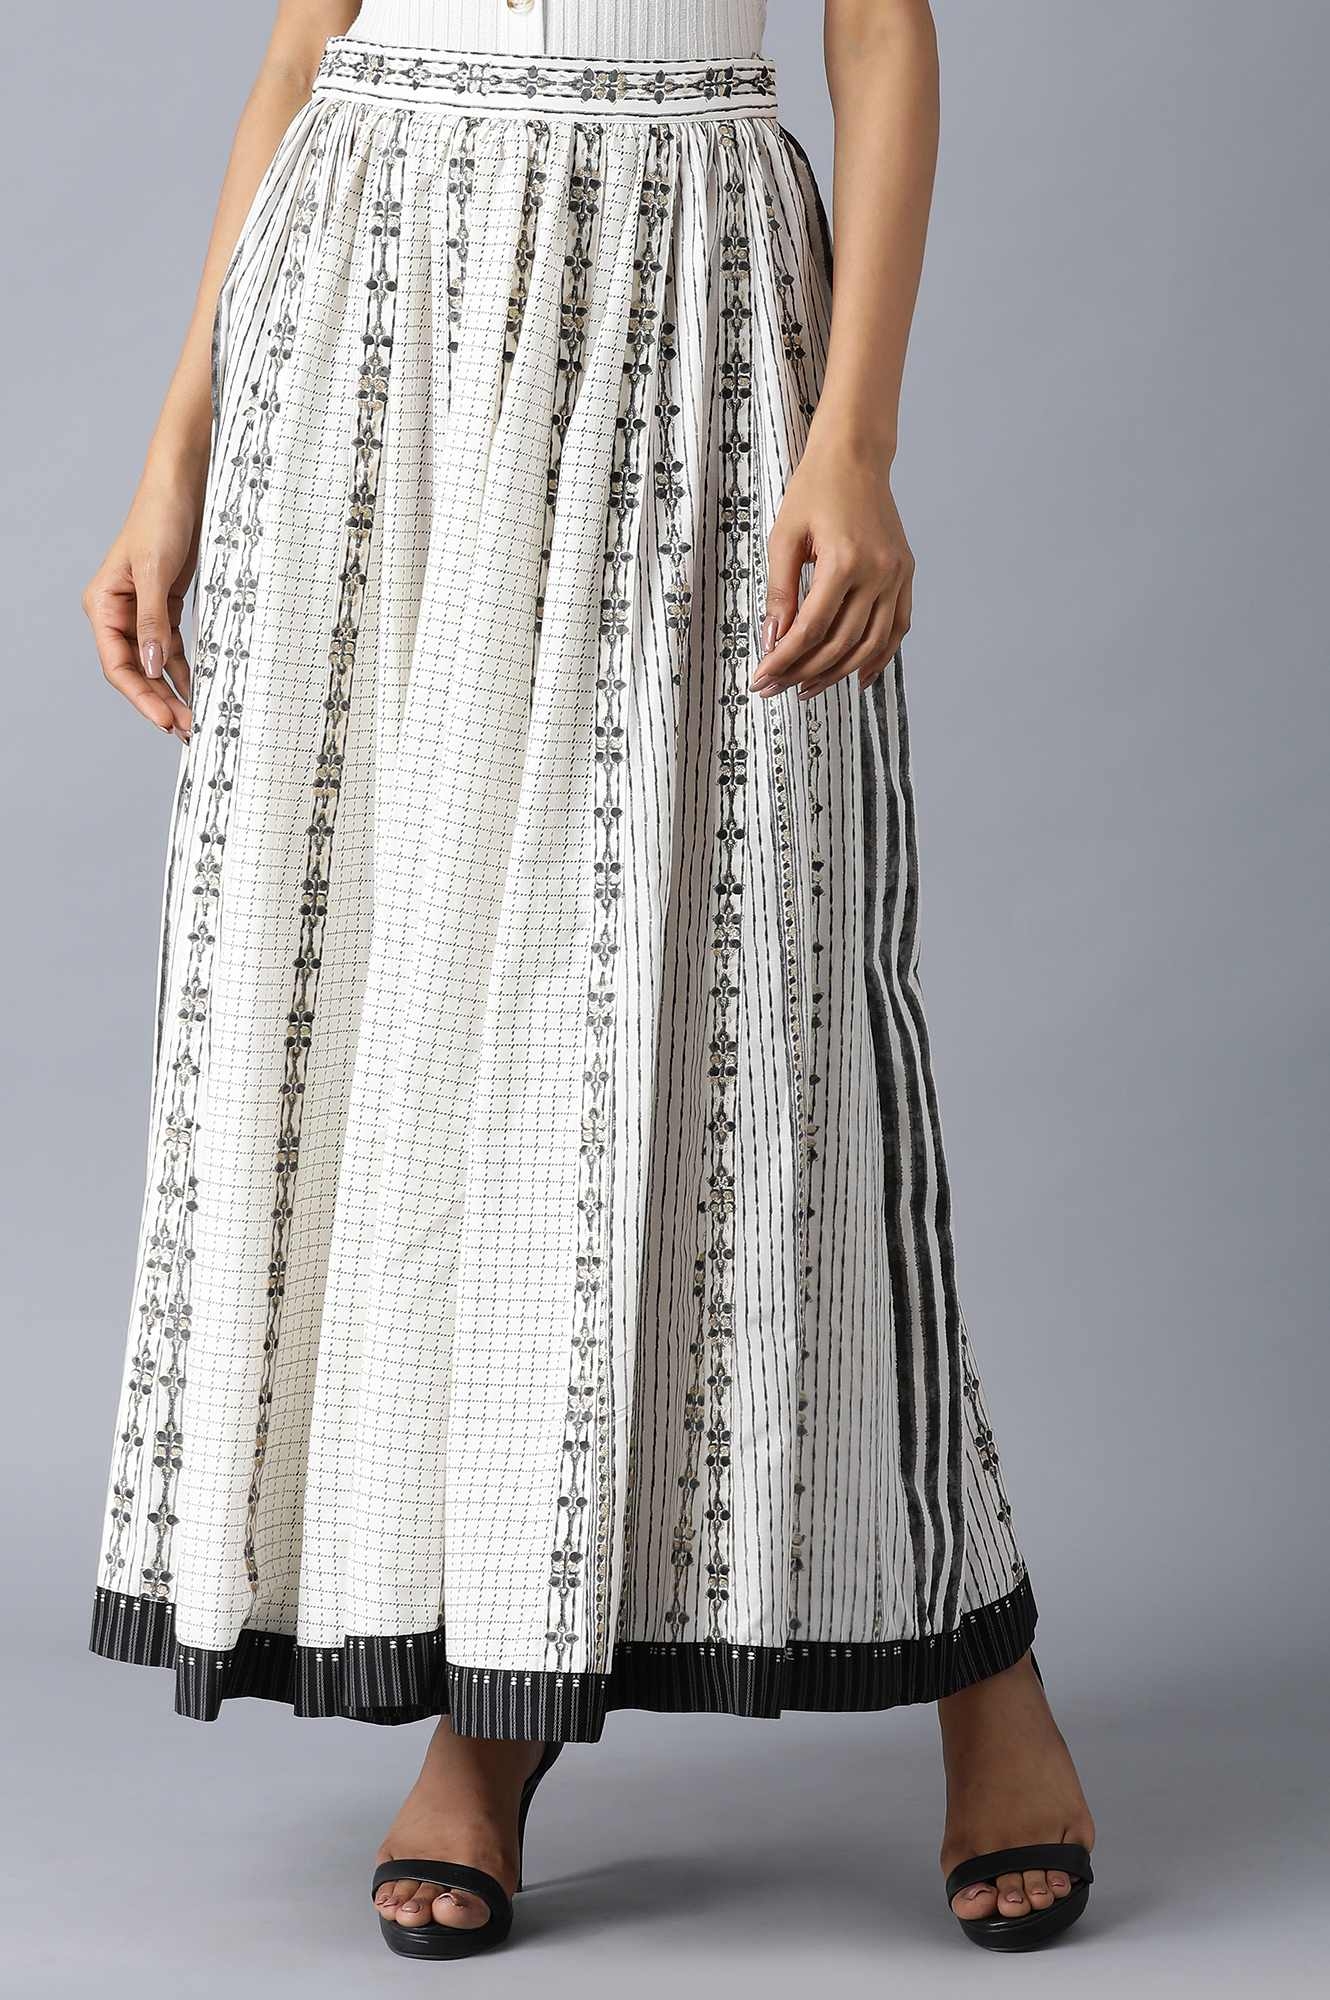 W | Black and White Printed Skirt